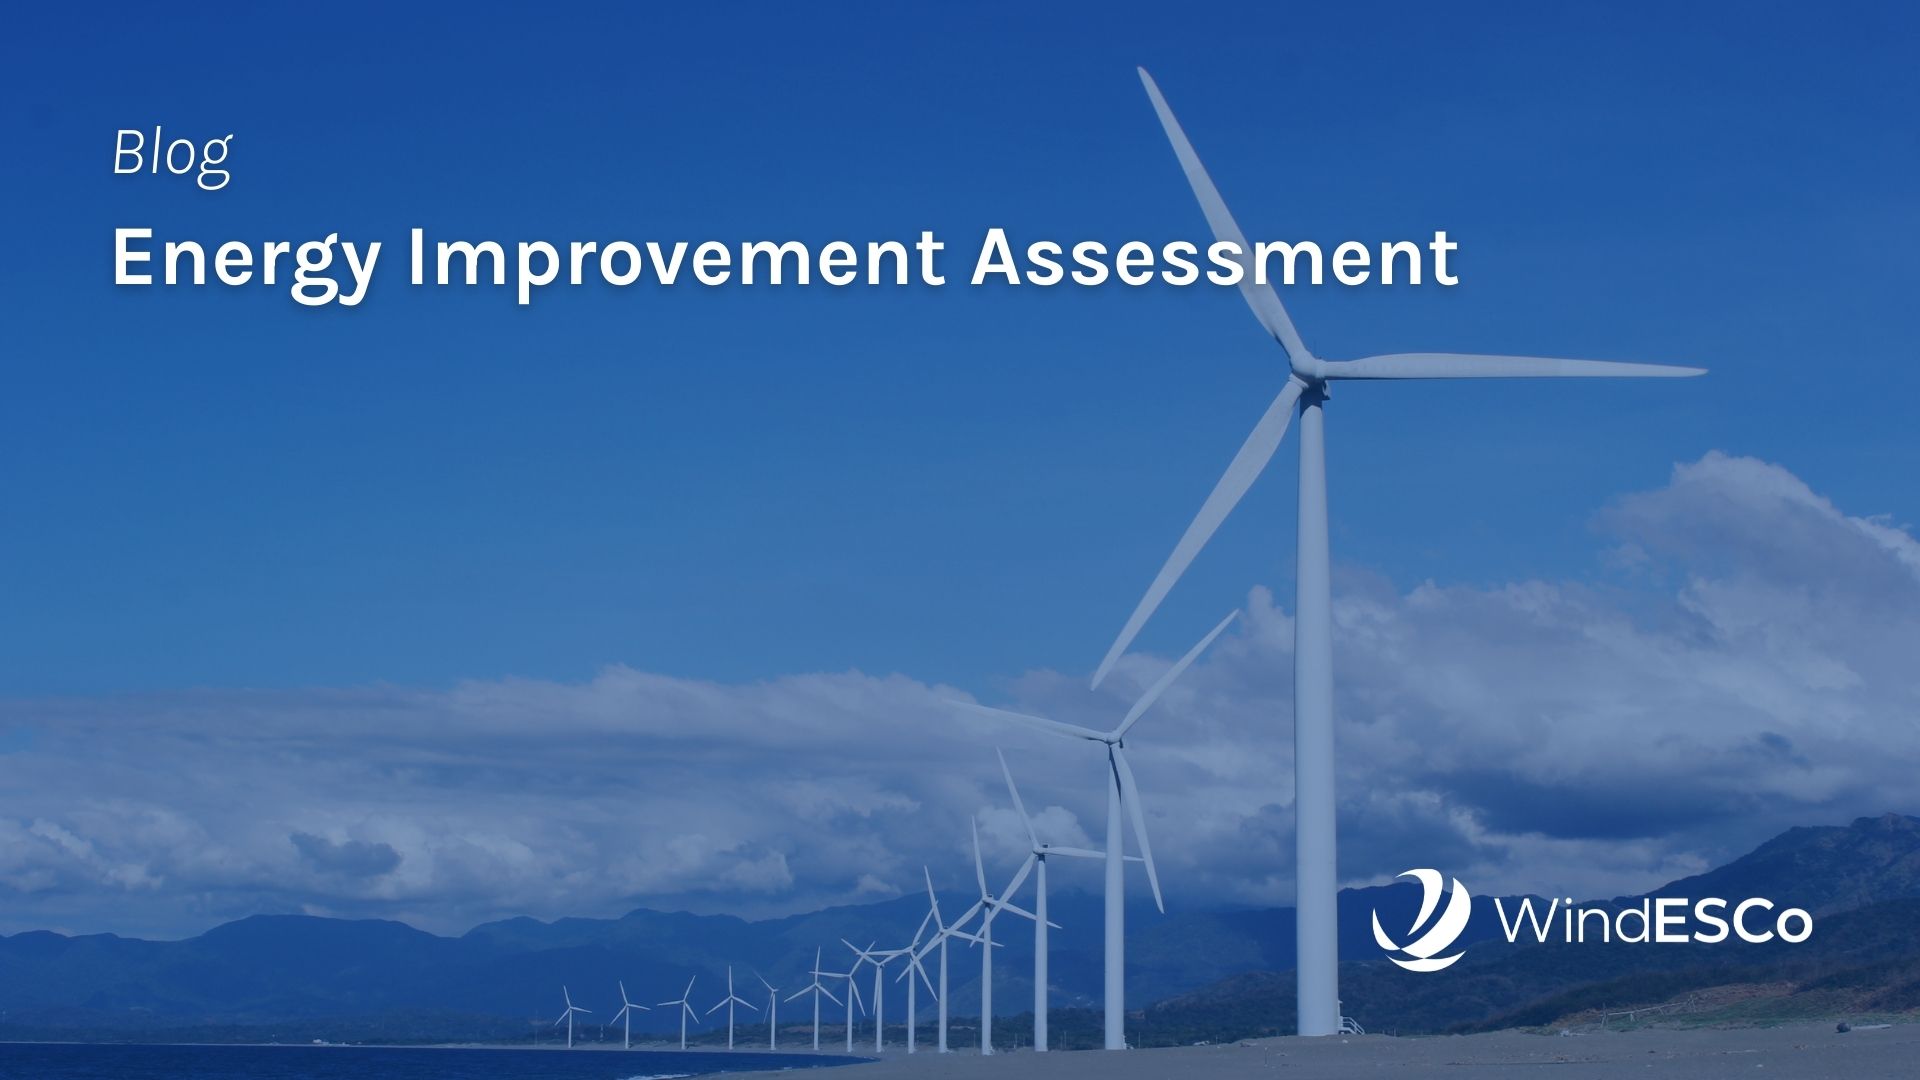 What is an Energy Improvement Assessment?